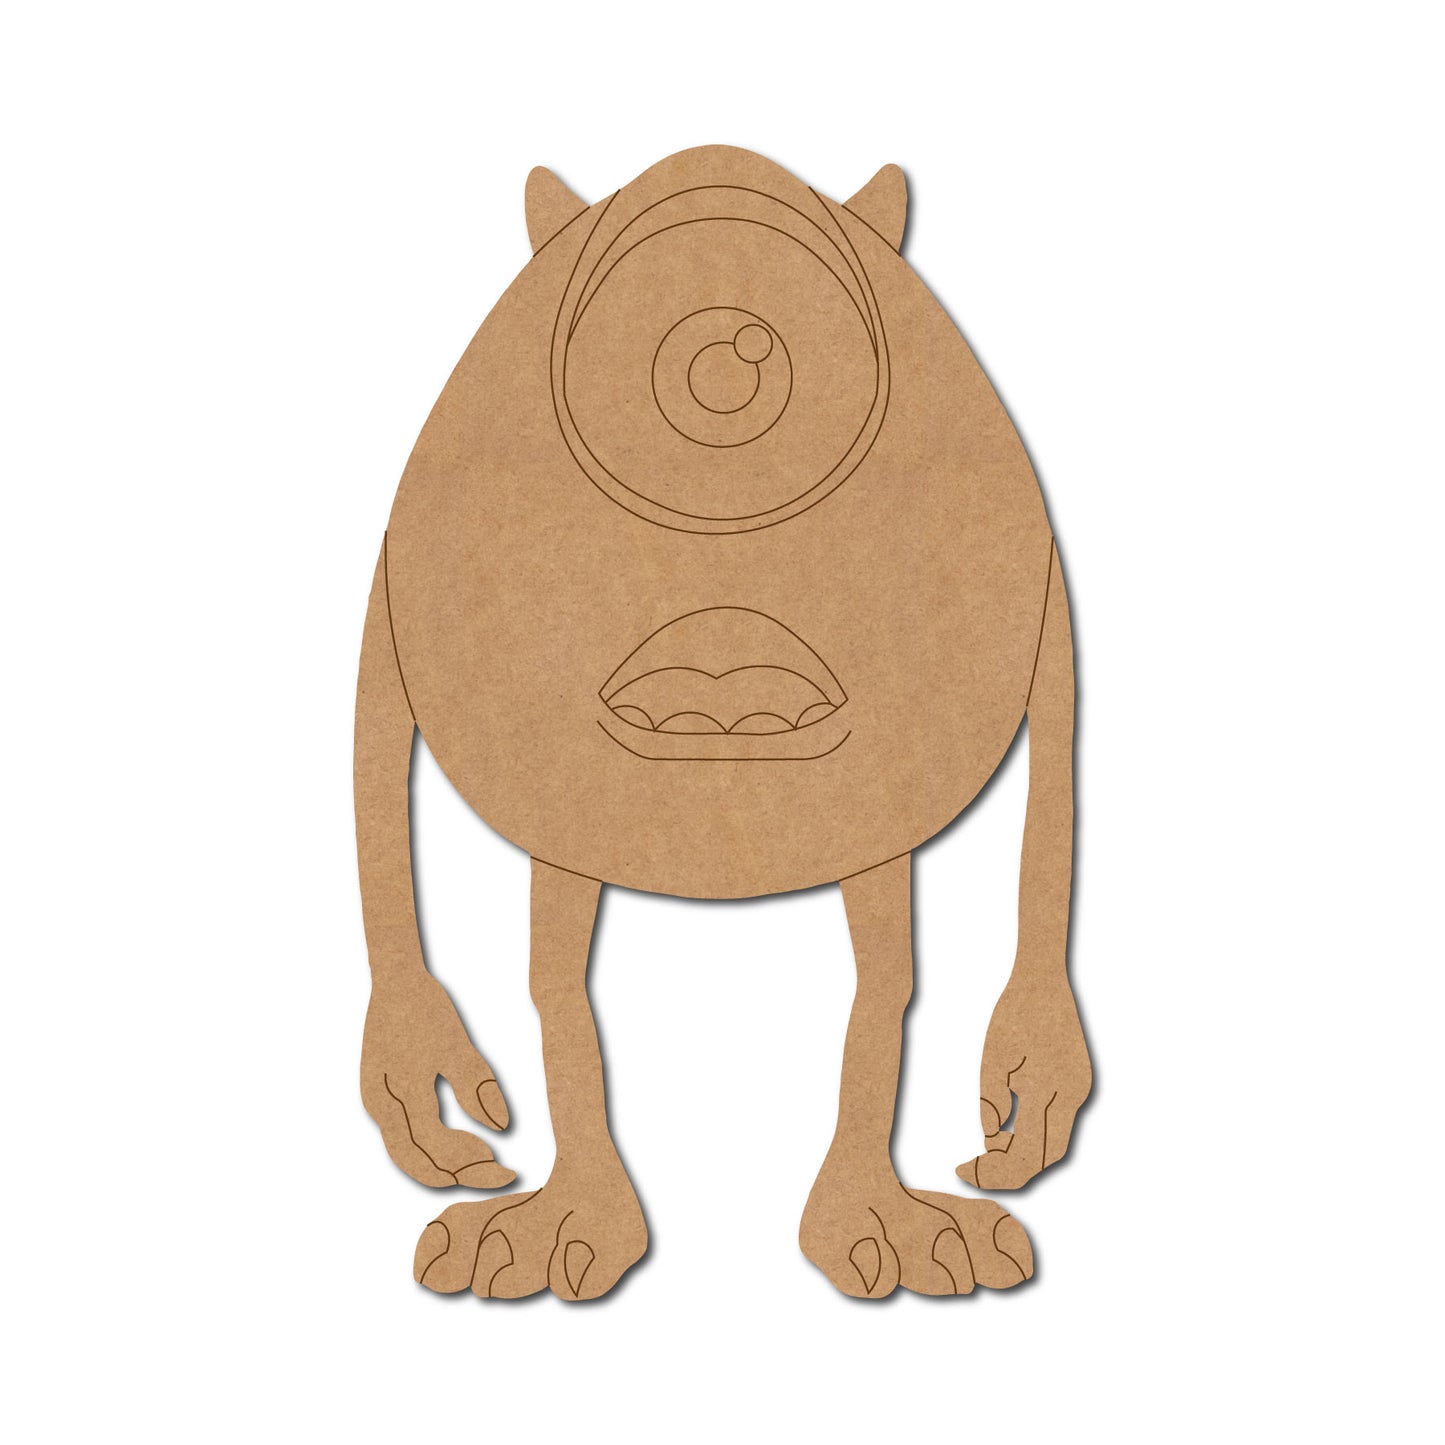 Mike Monsters Inc. Disney Pre Marked MDF Design 1